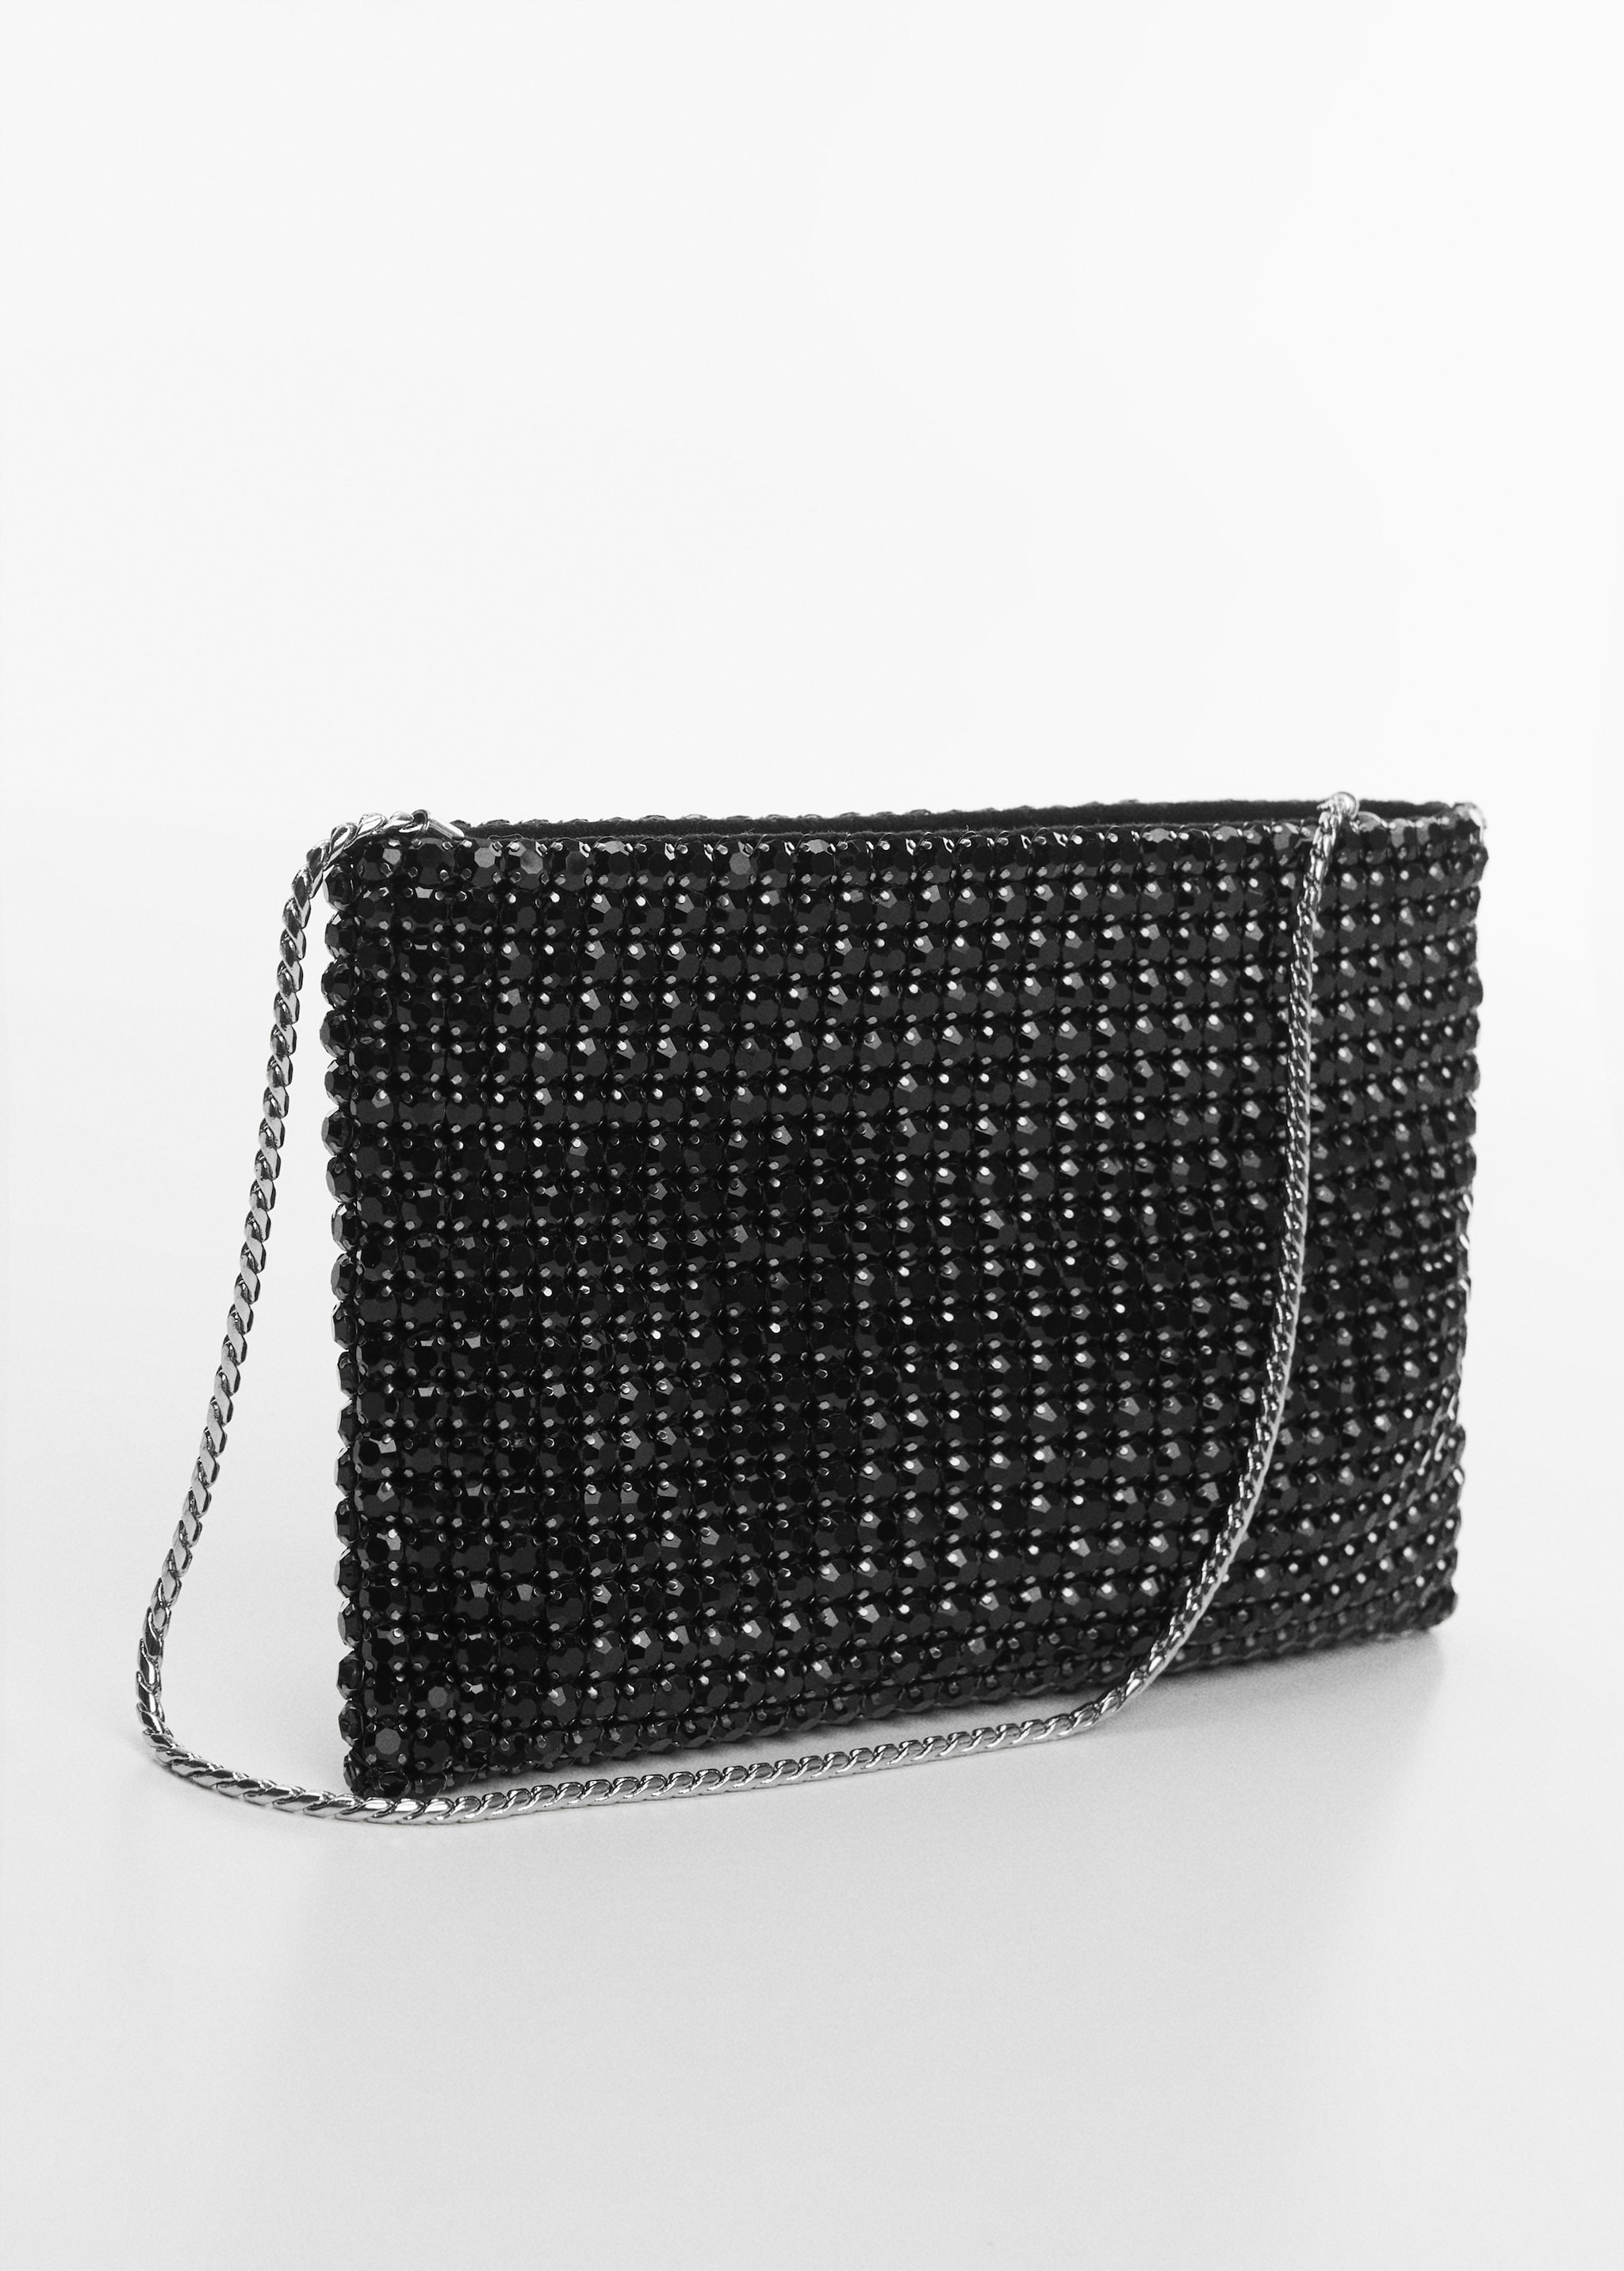 Chain bag with crystals - Medium plane